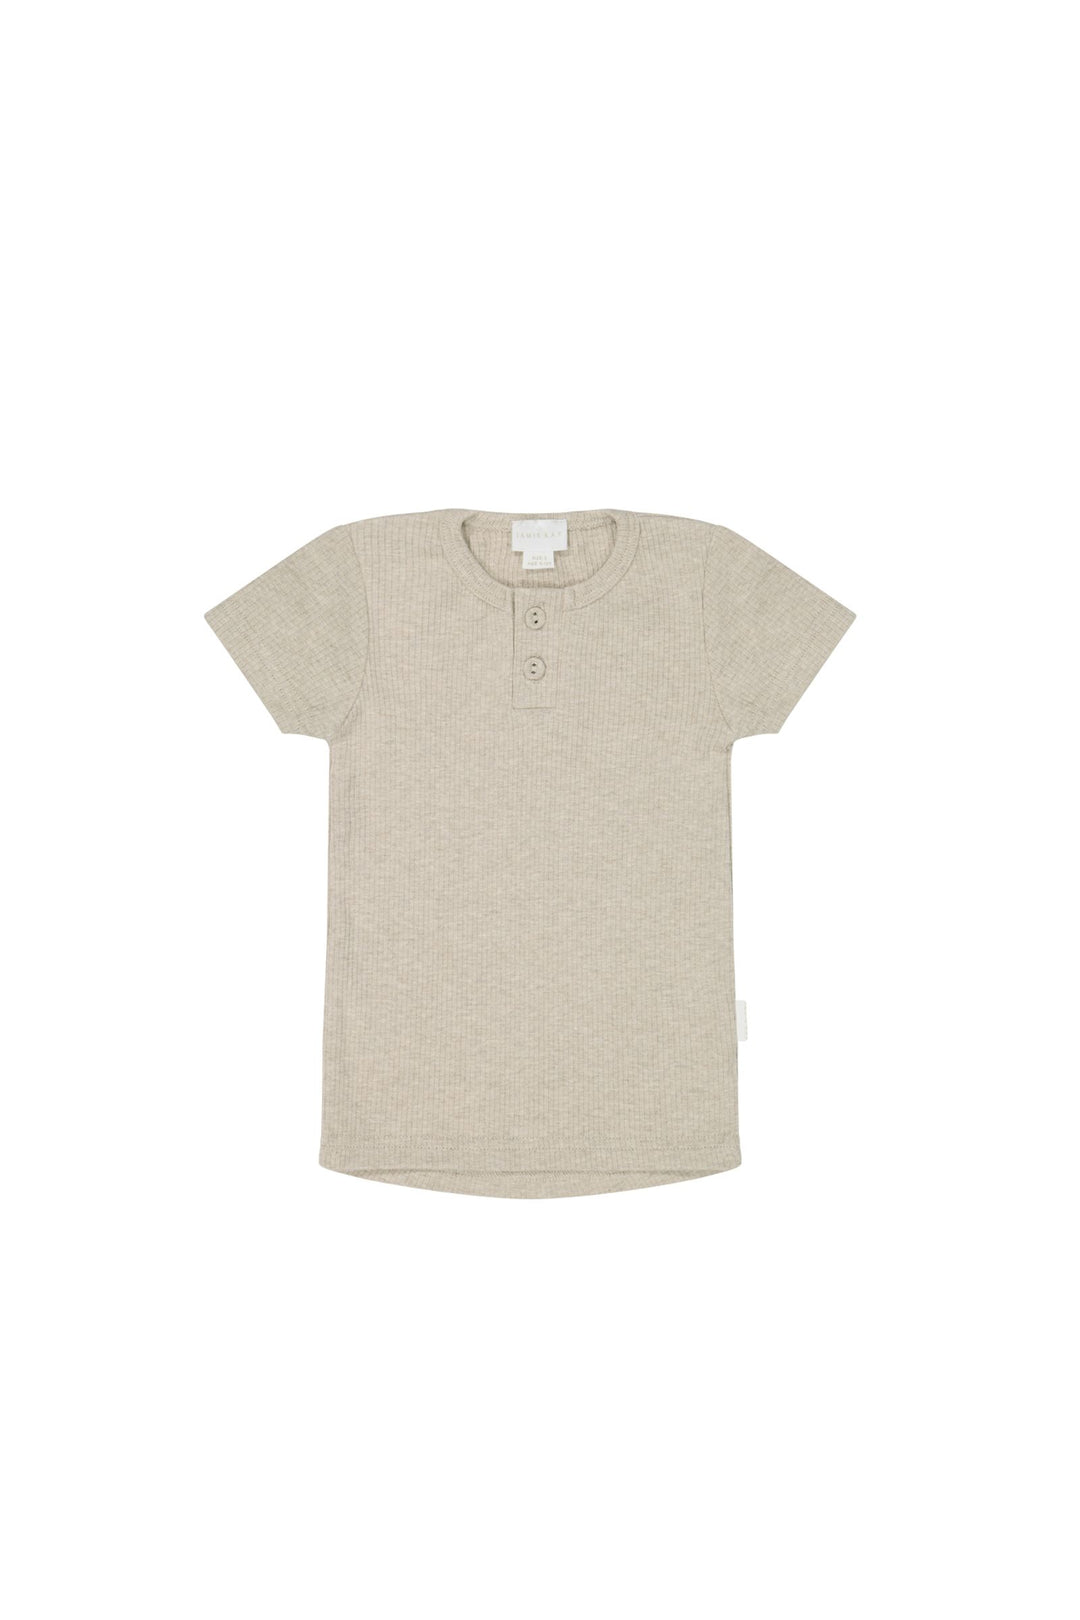 Darcy tee - sand marle - JL & CO. boutique 